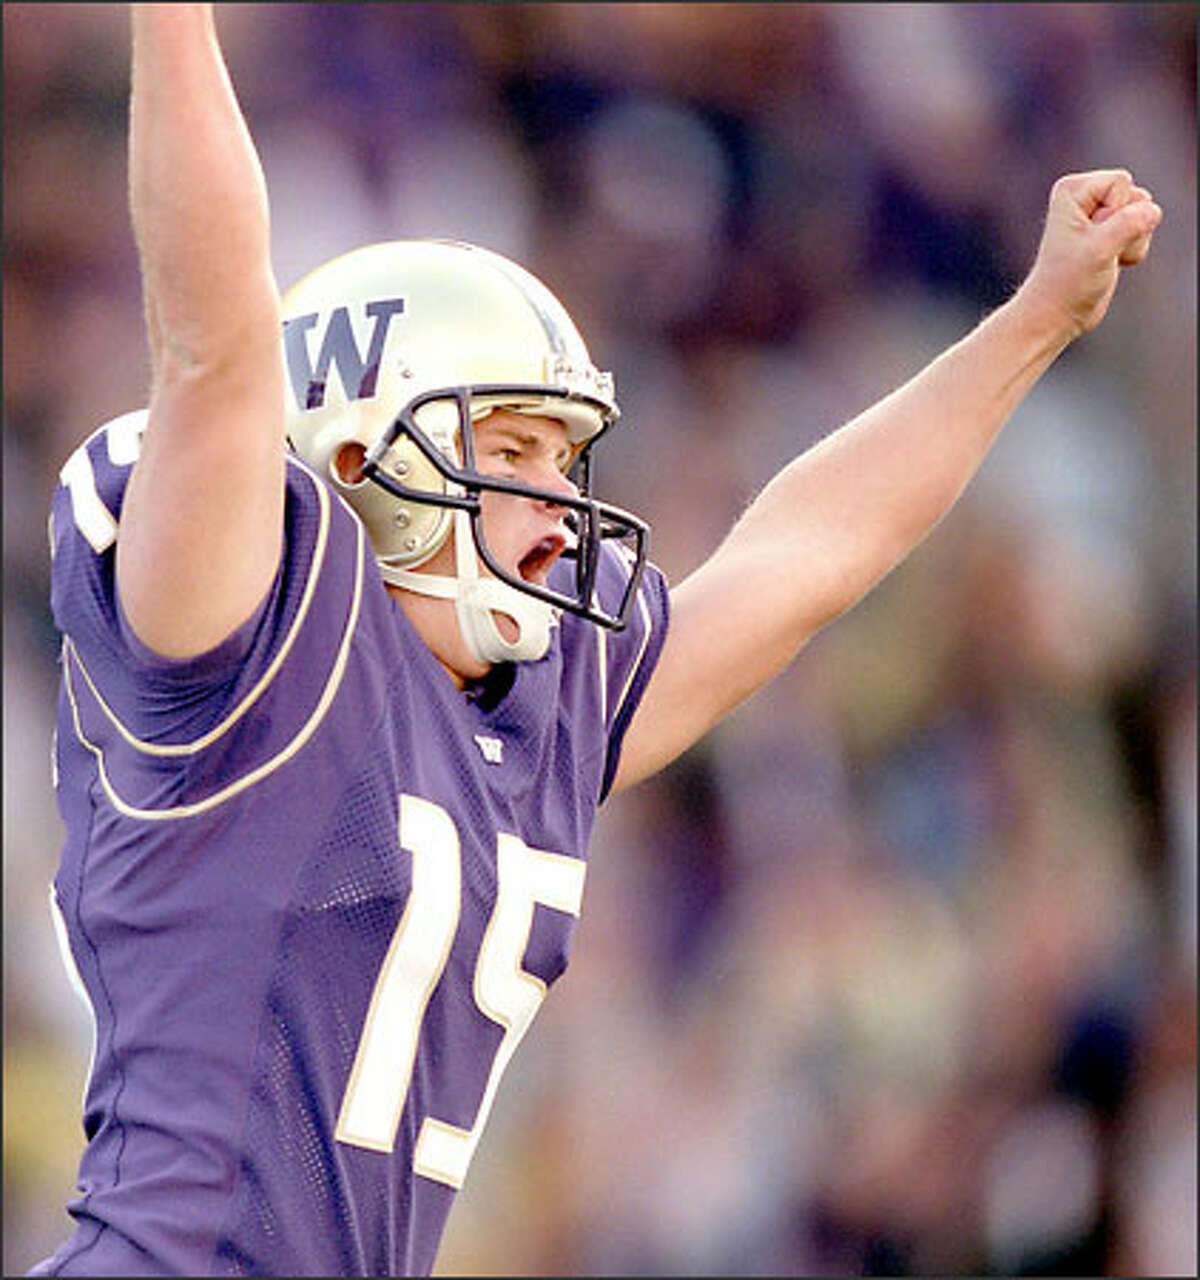 John Anderson celebrates after kicking the game-winning field goal with just 3 seconds left on the clock. The Huskies won 27-24.